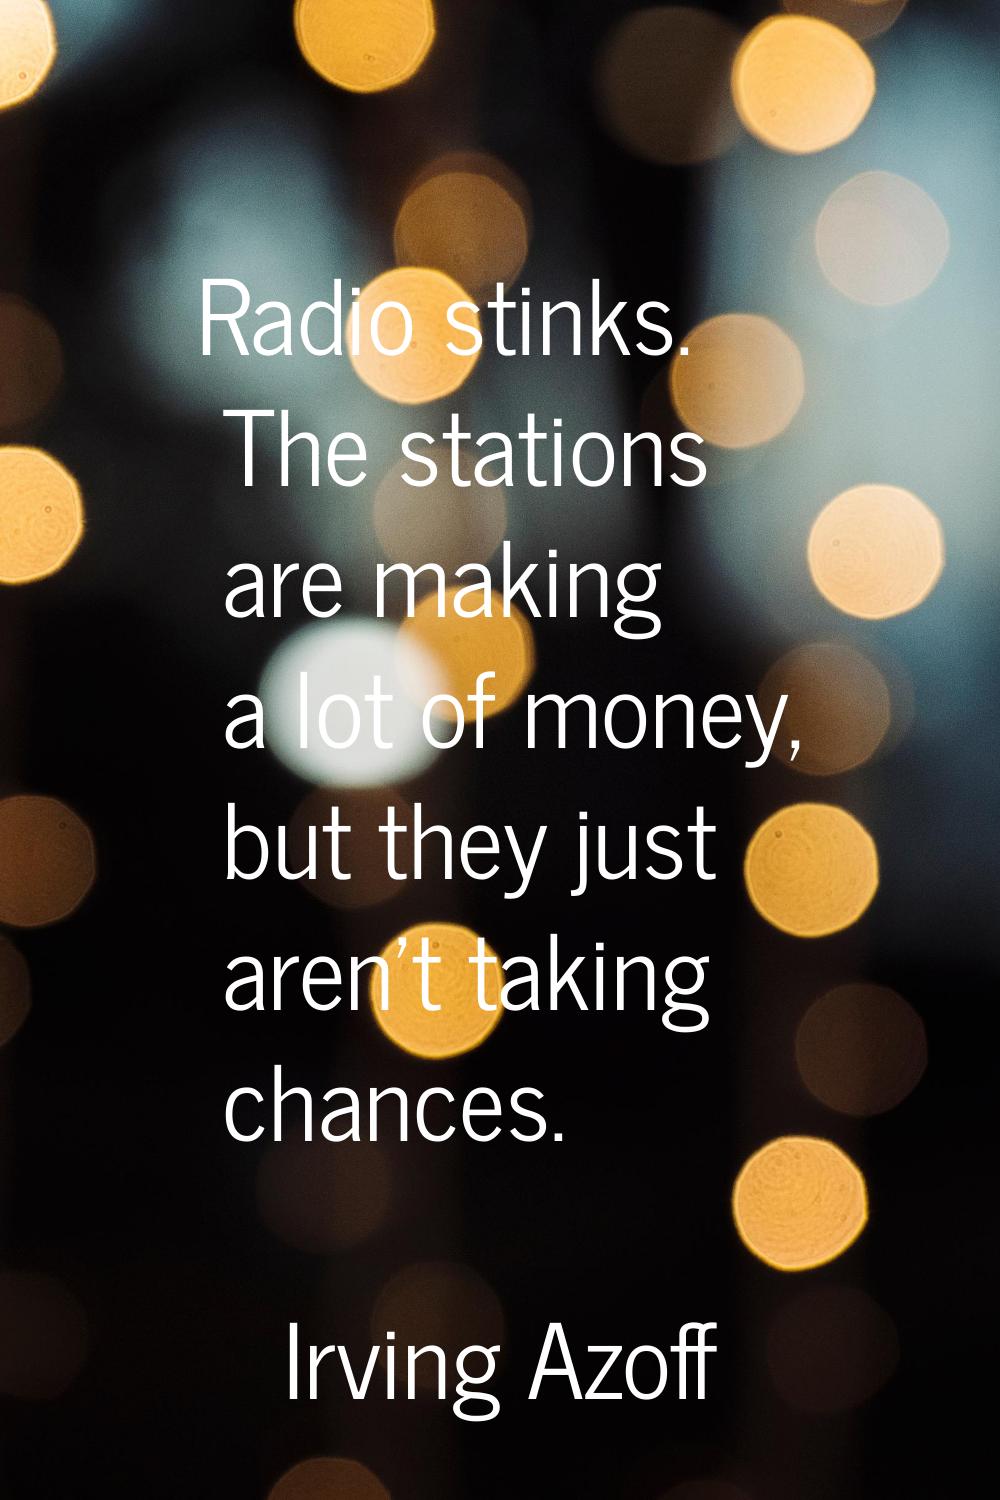 Radio stinks. The stations are making a lot of money, but they just aren't taking chances.